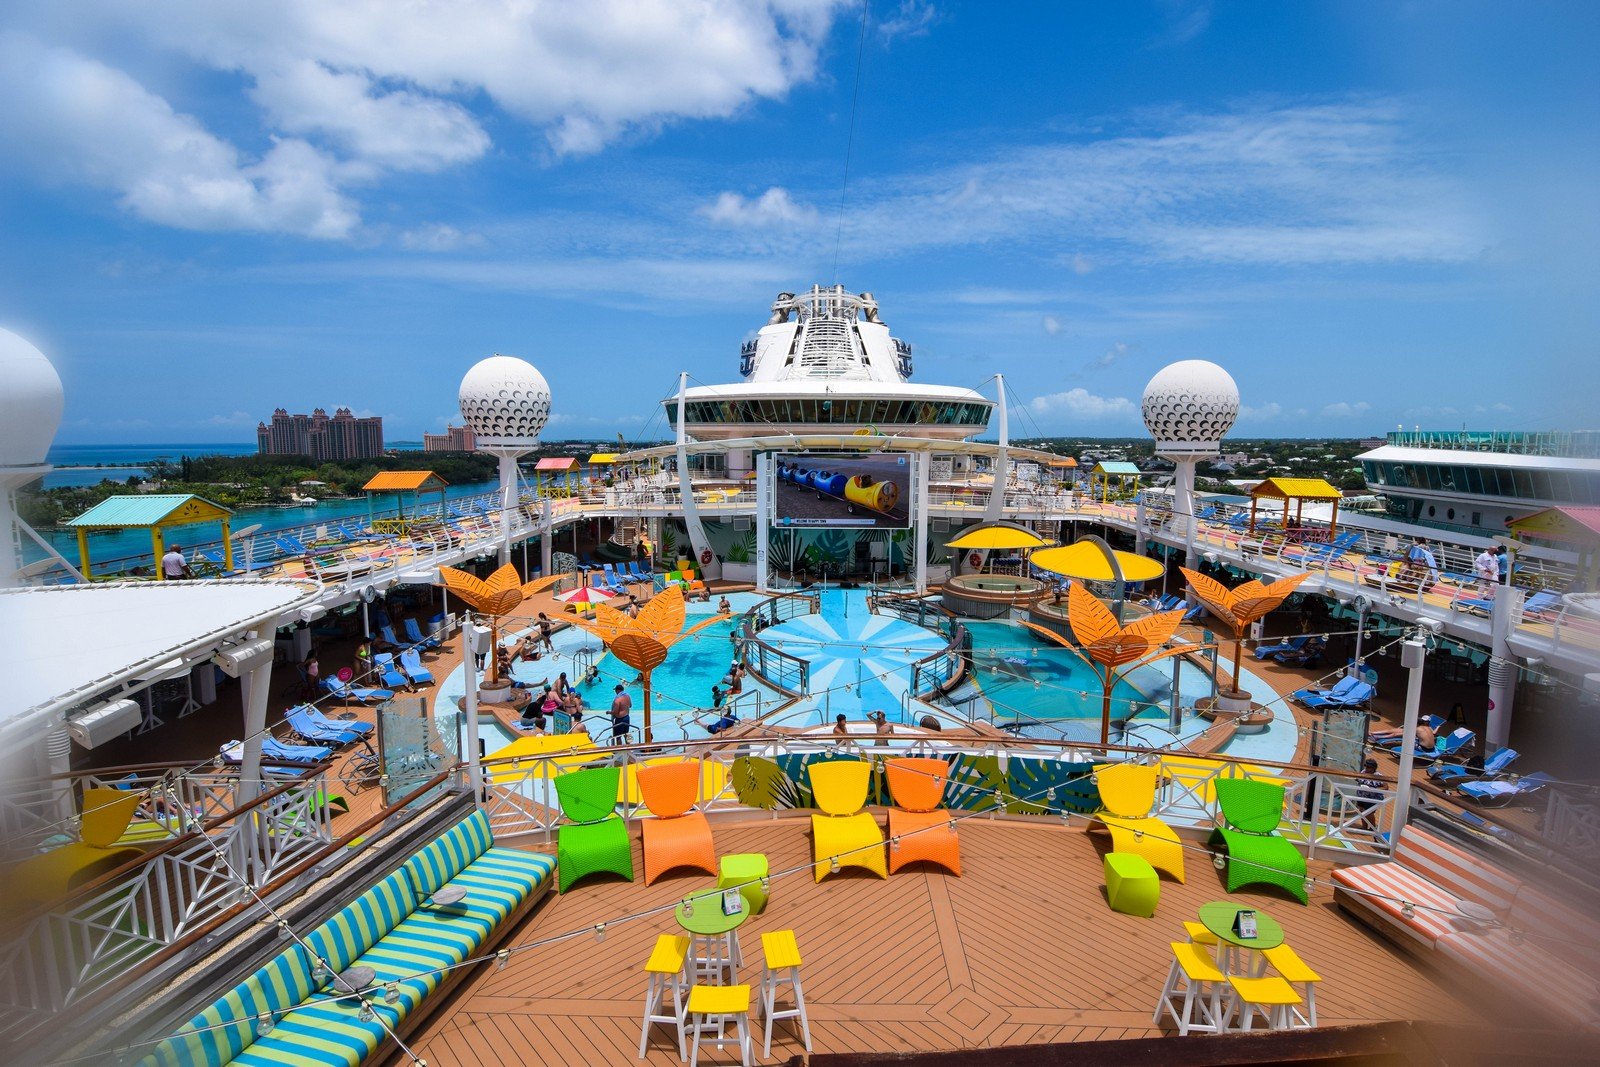 A look around the big changes on Freedom of the Seas | Royal Caribbean Blog